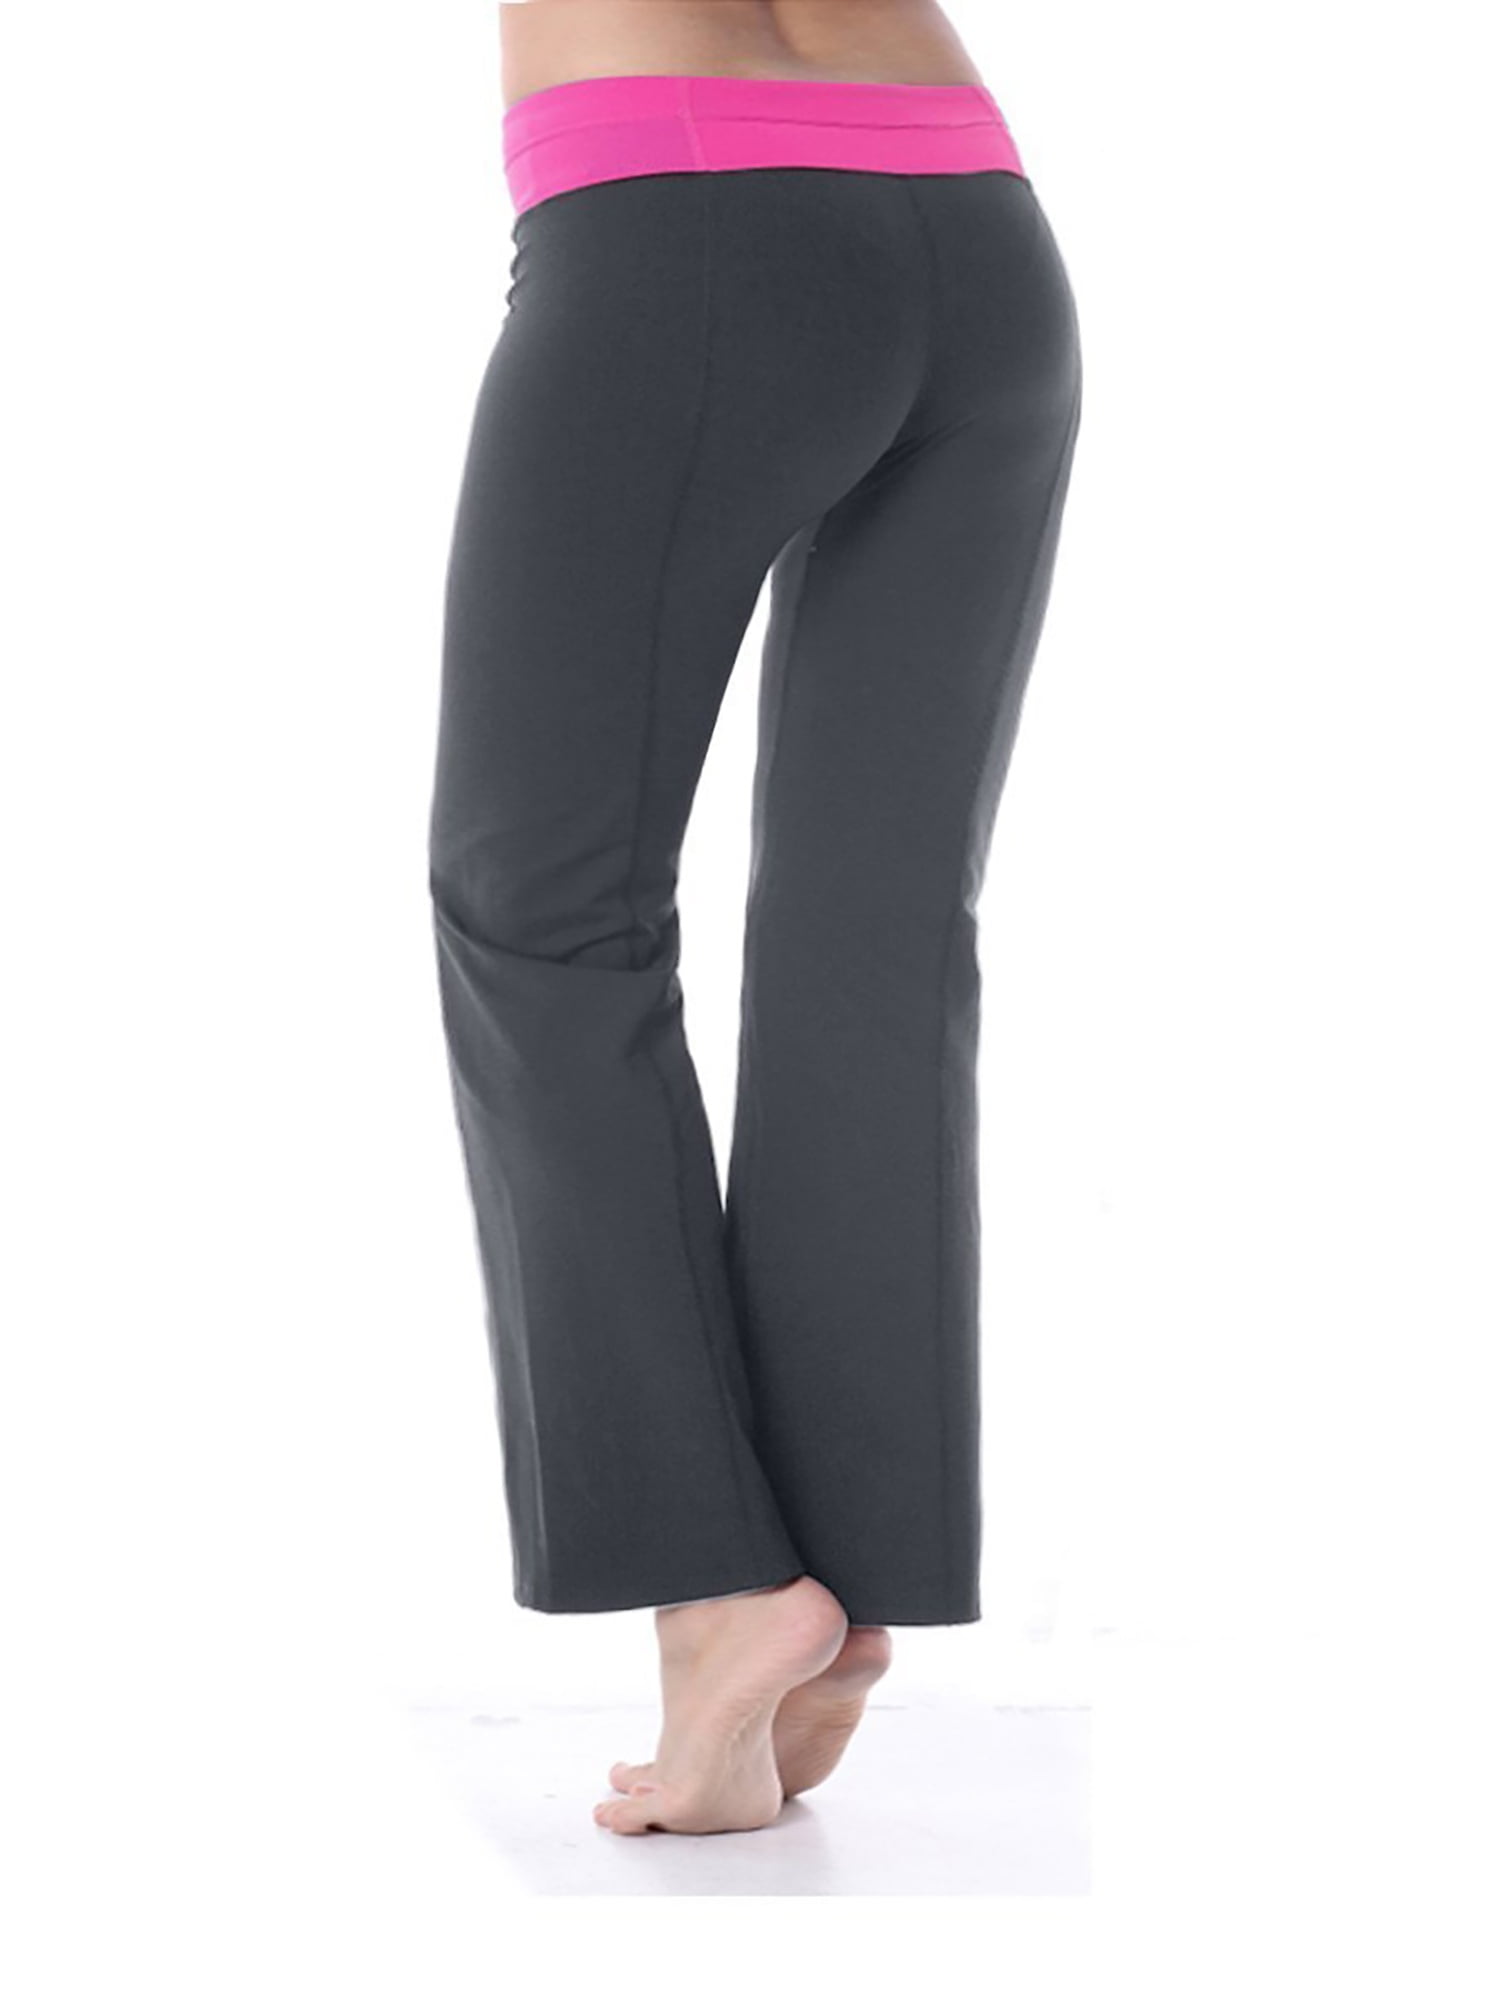 Bootcut Yoga Pants Cotton with Contrast 